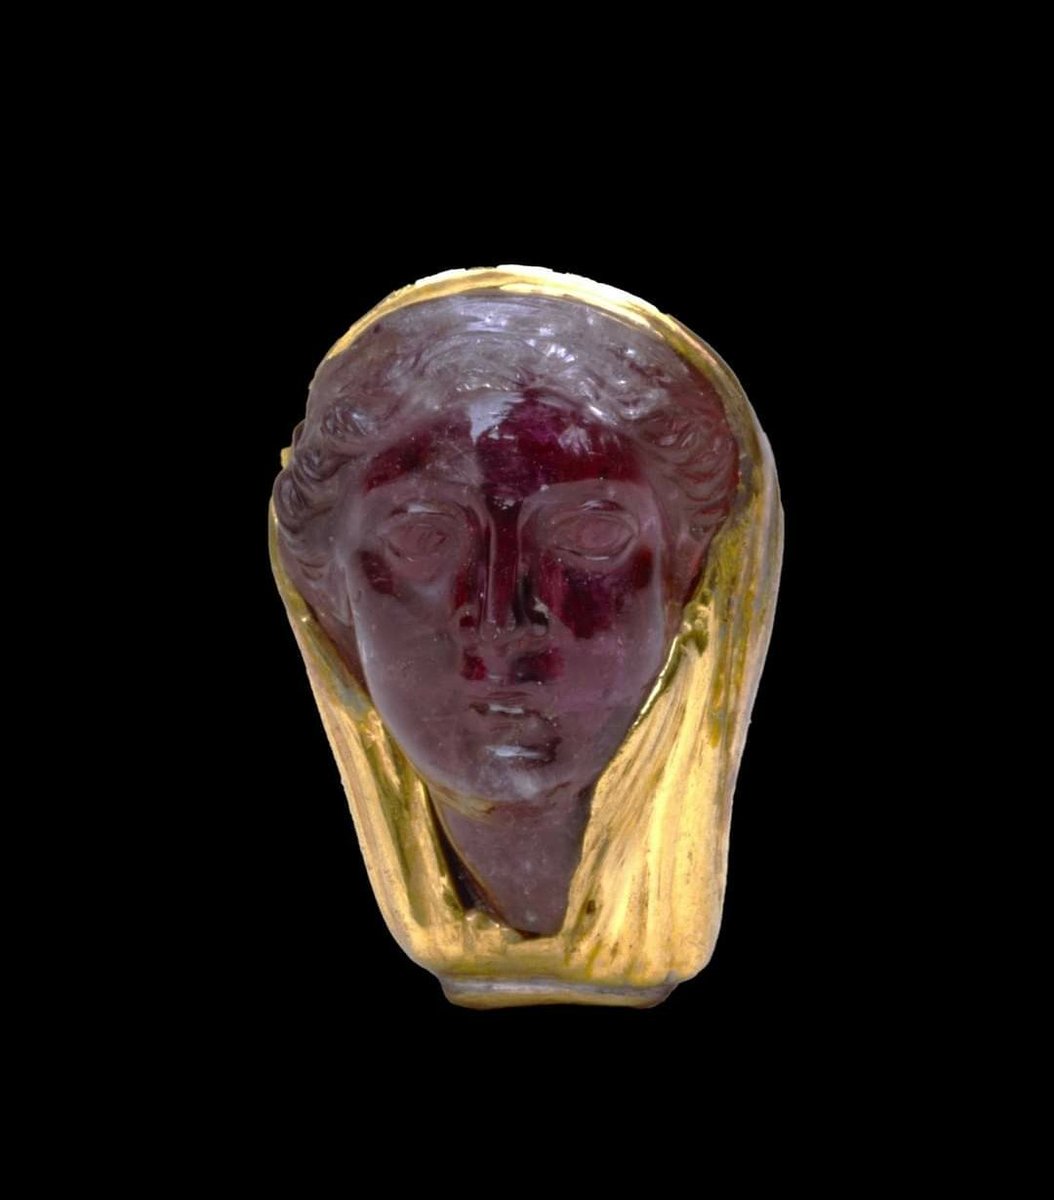 Amethyst head wrapped in gold, of Arsinoë II, Queen of Ptolemaic Egypt, c. 300 B.C.